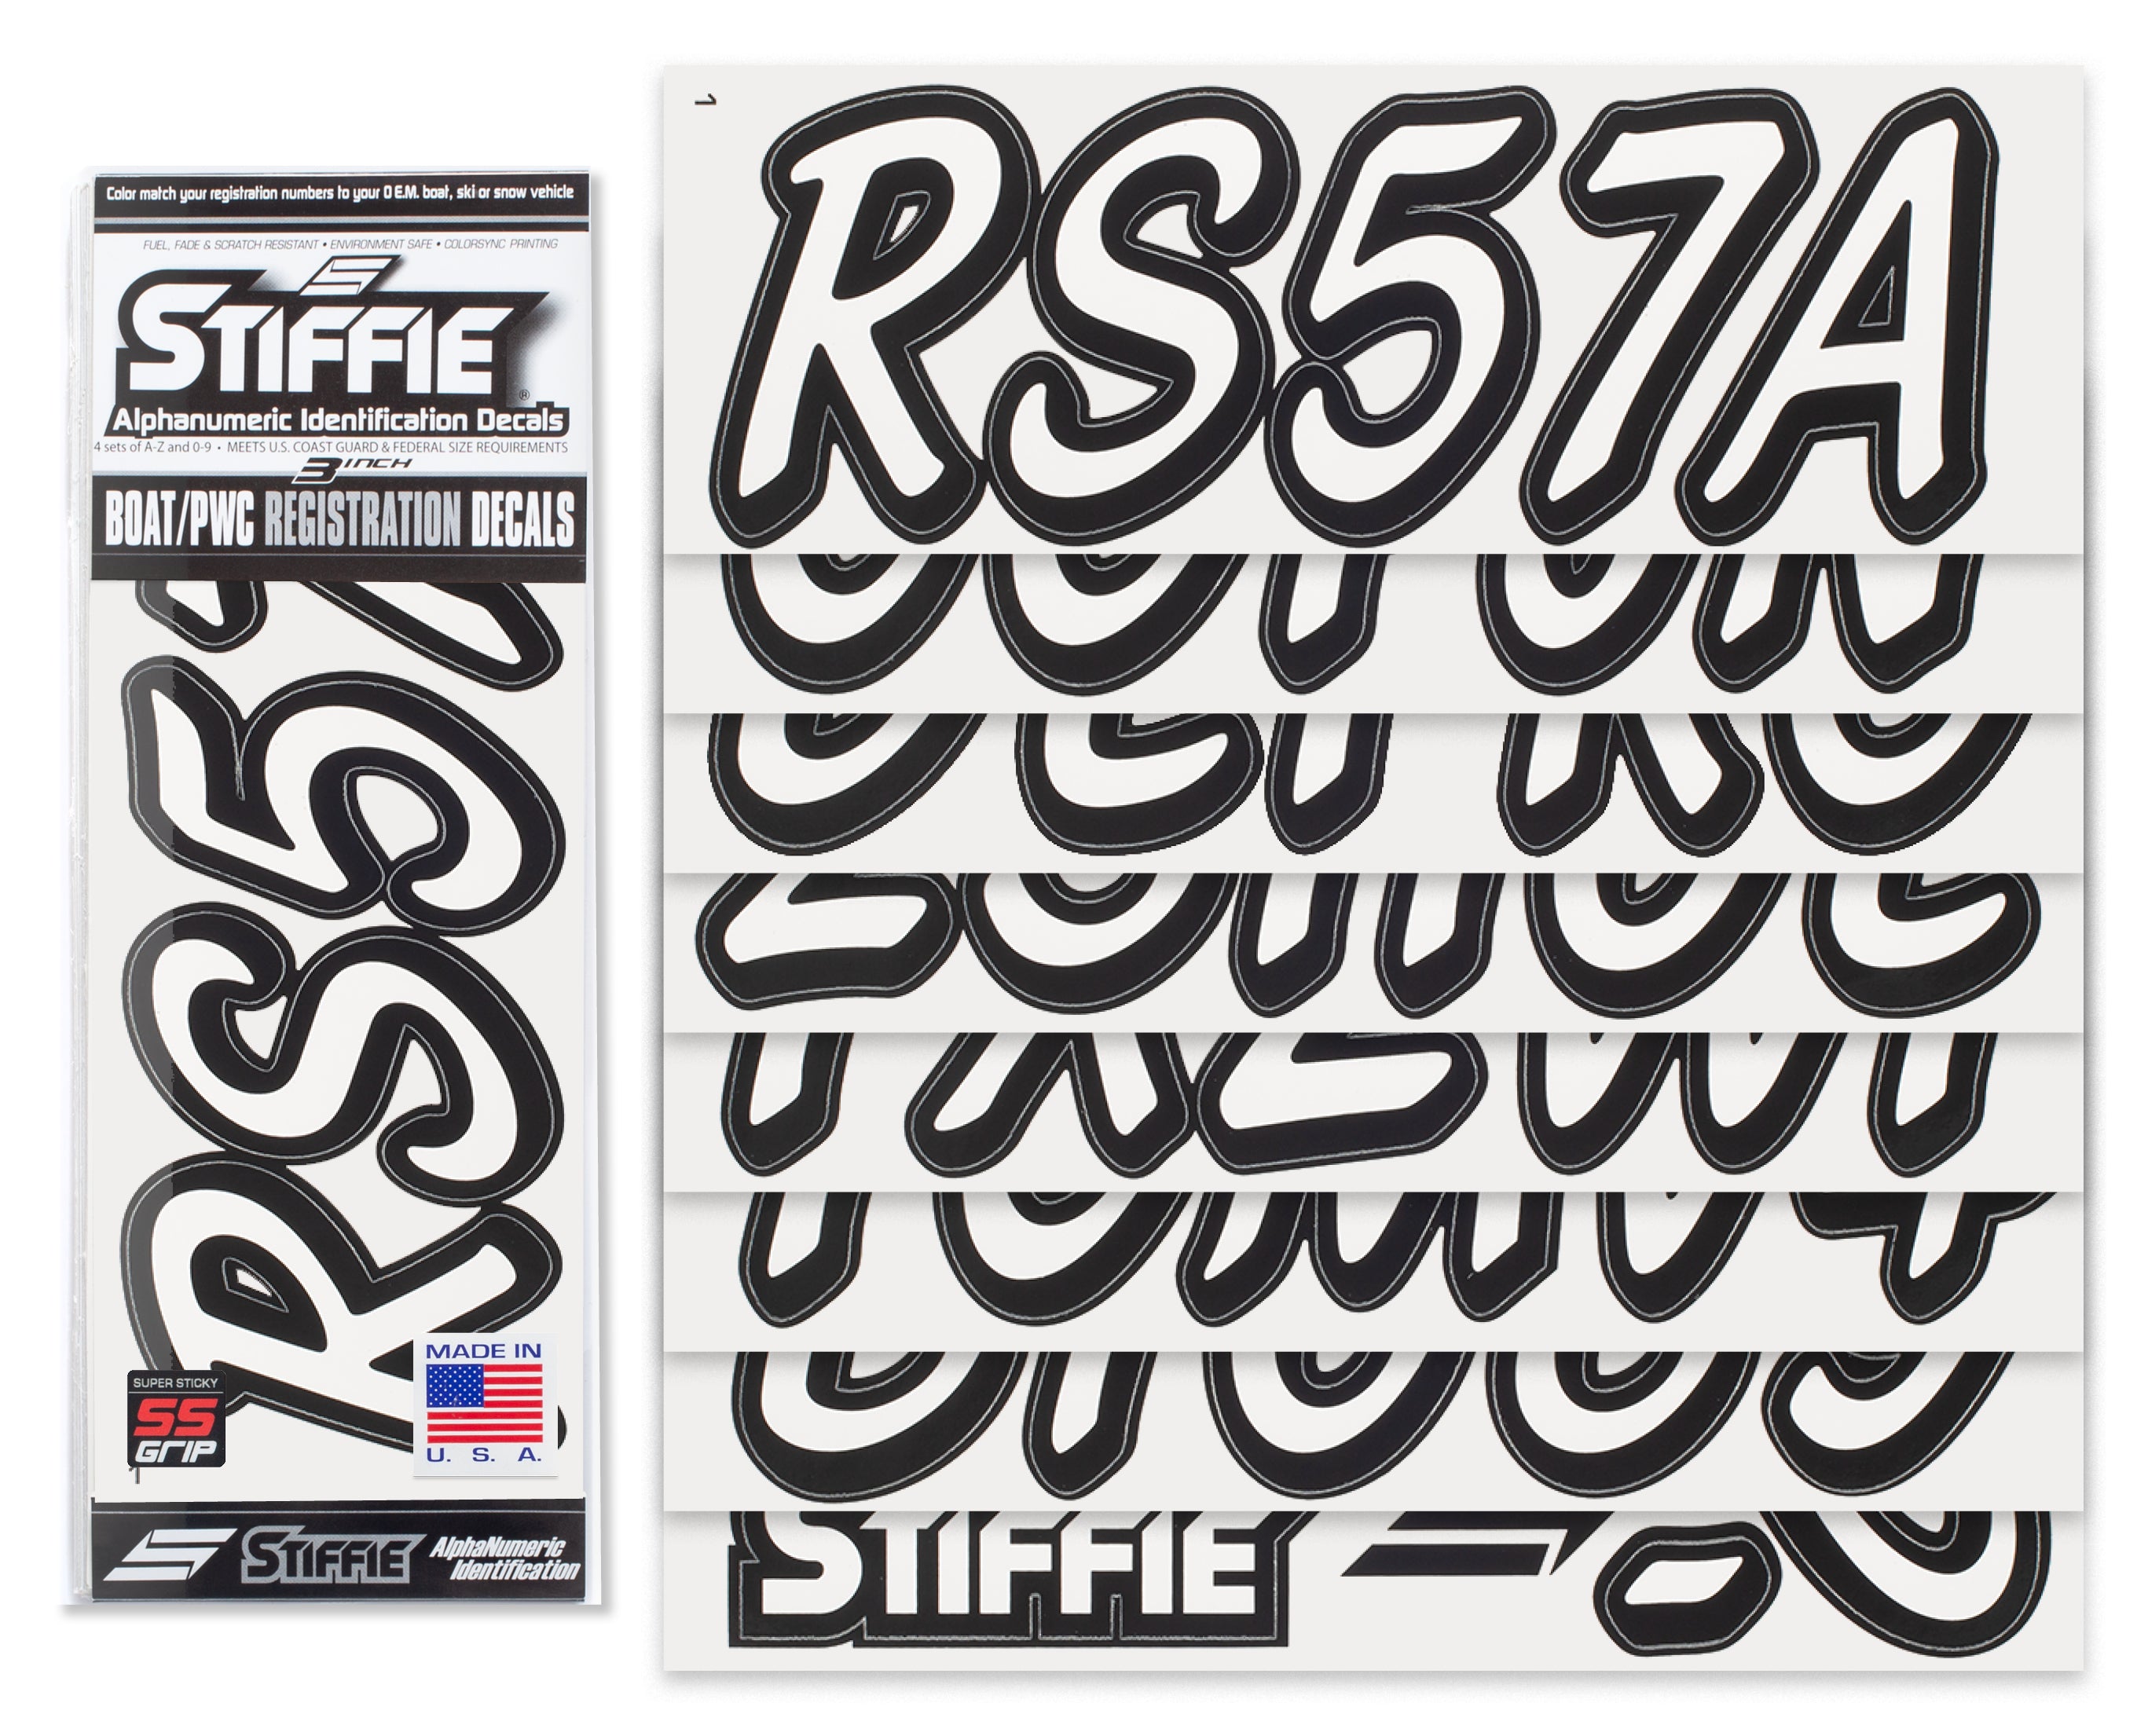 STIFFIE Whipline Solid White/Black Super Sticky 3" Alpha-Numeric Registration Identification Numbers Stickers Decals for Boats & Personal Watercraft